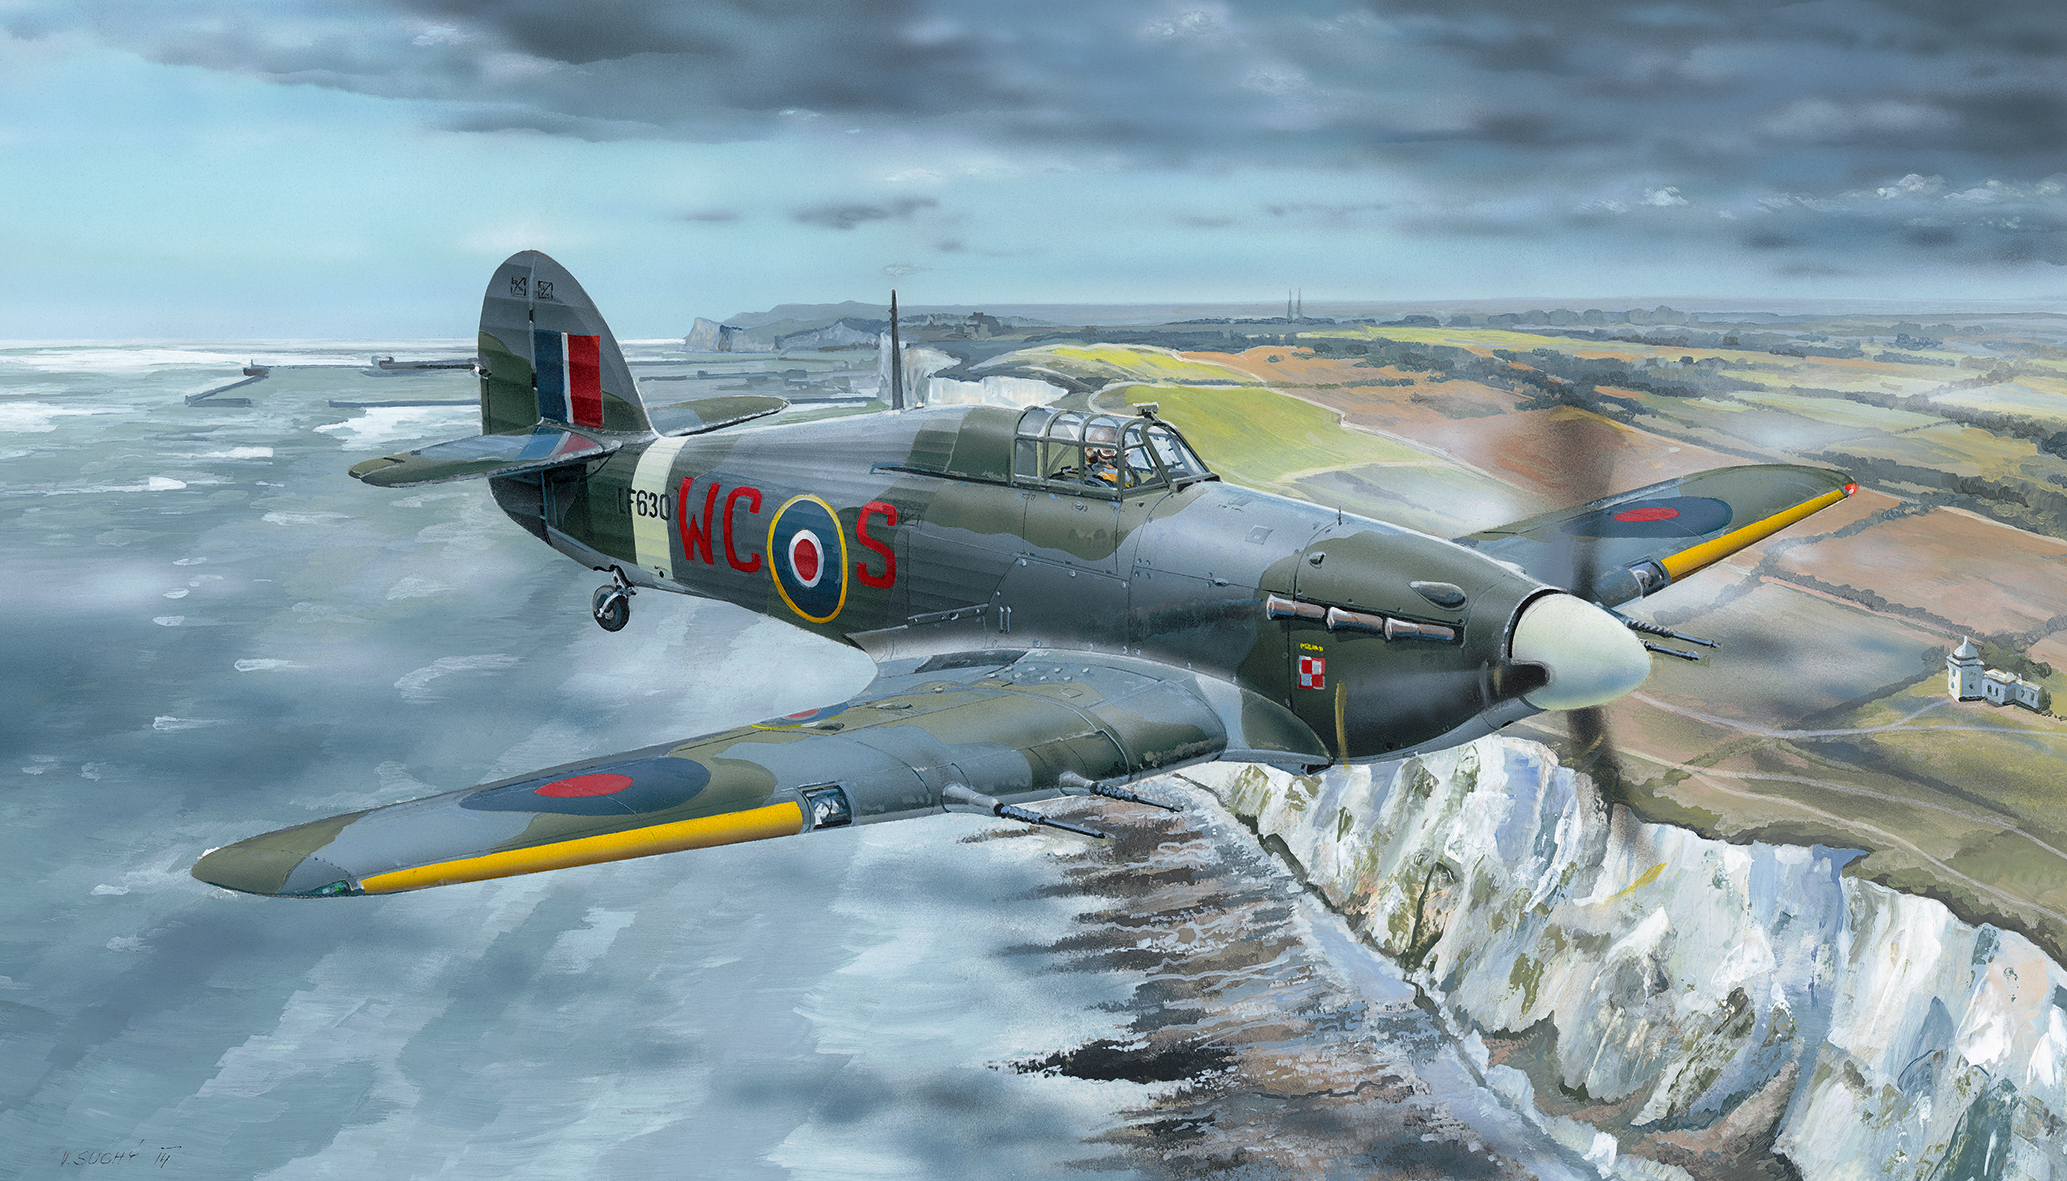 A detailed close-up of a Hawker Hurricane military aircraft captured in a high-definition desktop wallpaper and background.